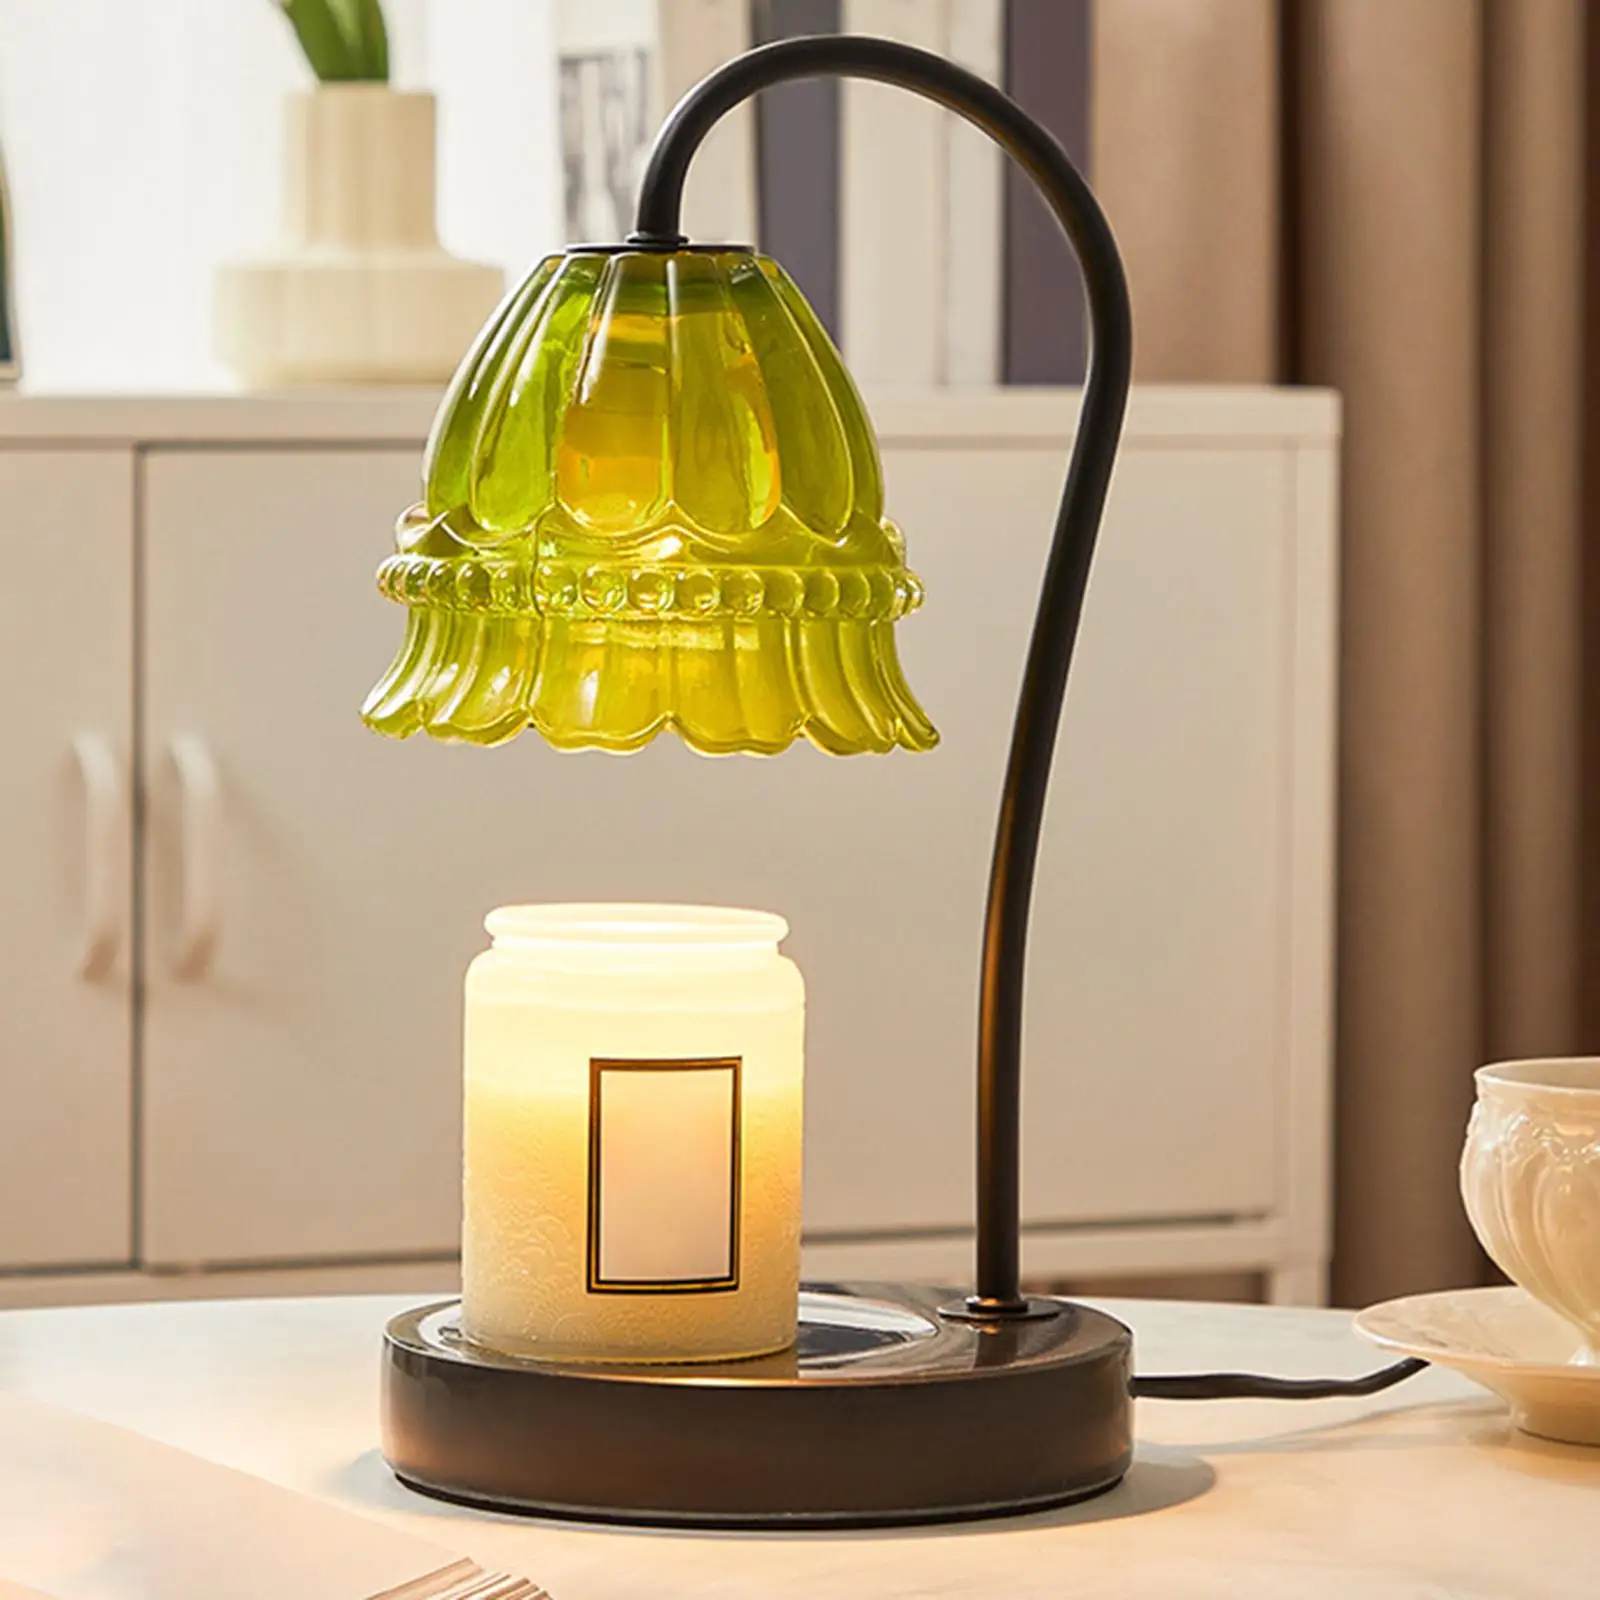 Candle Warmer Lamp Bedside Lights Dimmable Wax Melting Heater for Bedroom Decor